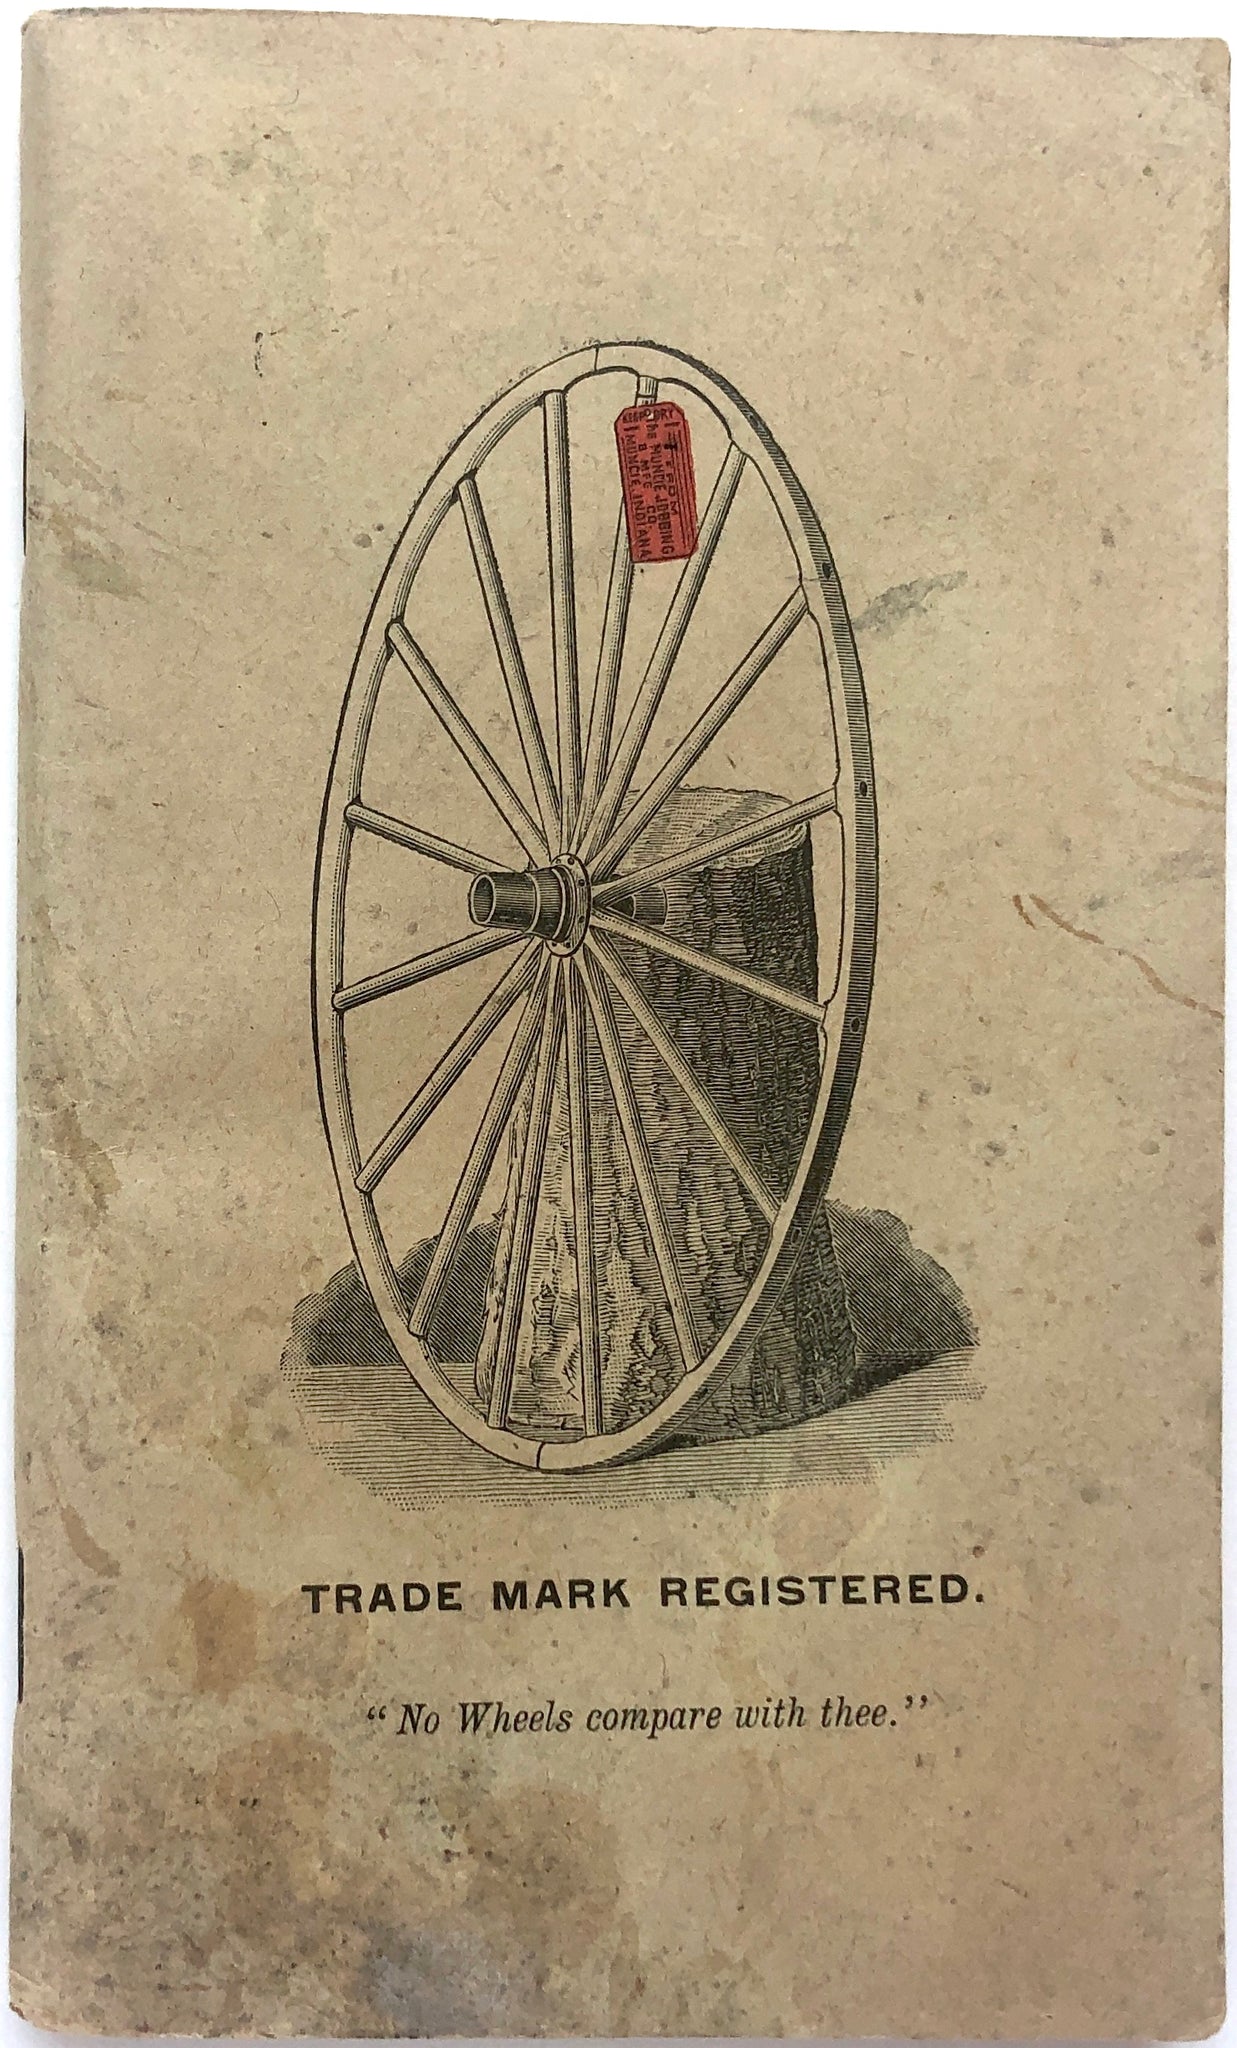 The Muncie Jobbing & Manufacturing. Co. Special Price List No. 30 (1919 catalog of wagons, buggies, wheels, etc.)